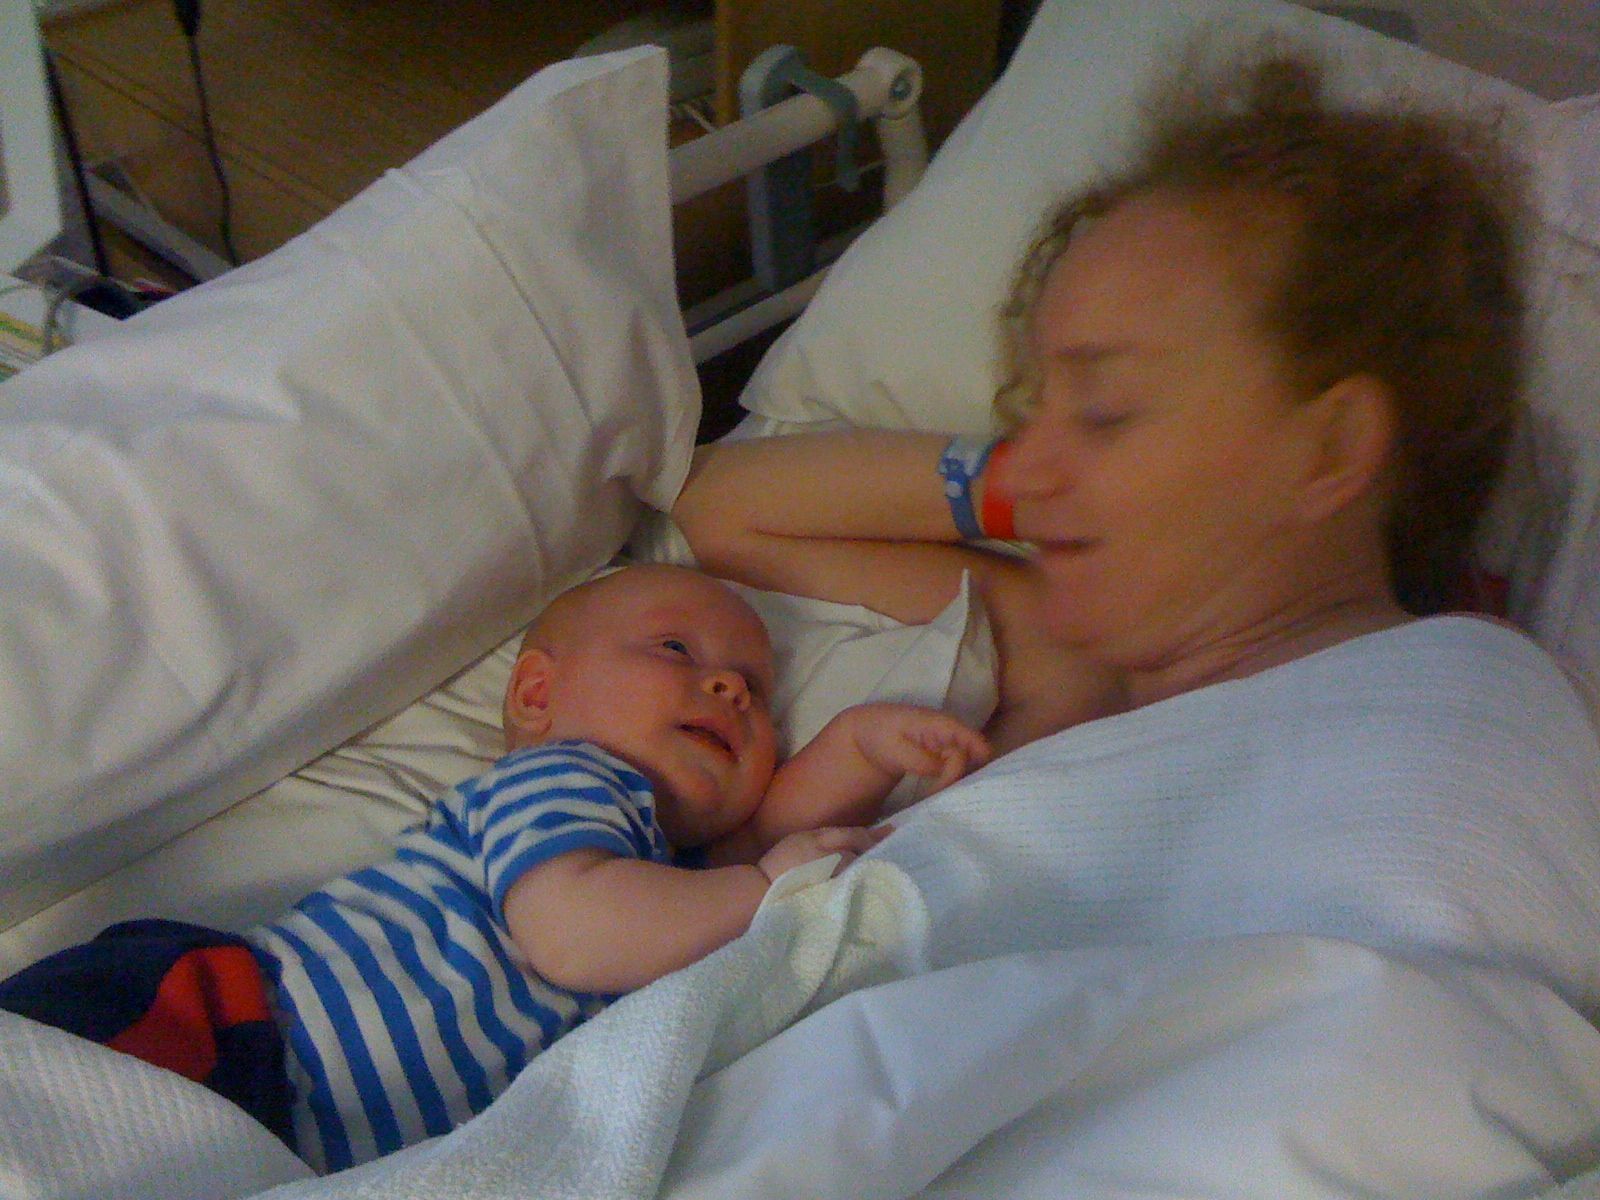 in the hospital bed with baby